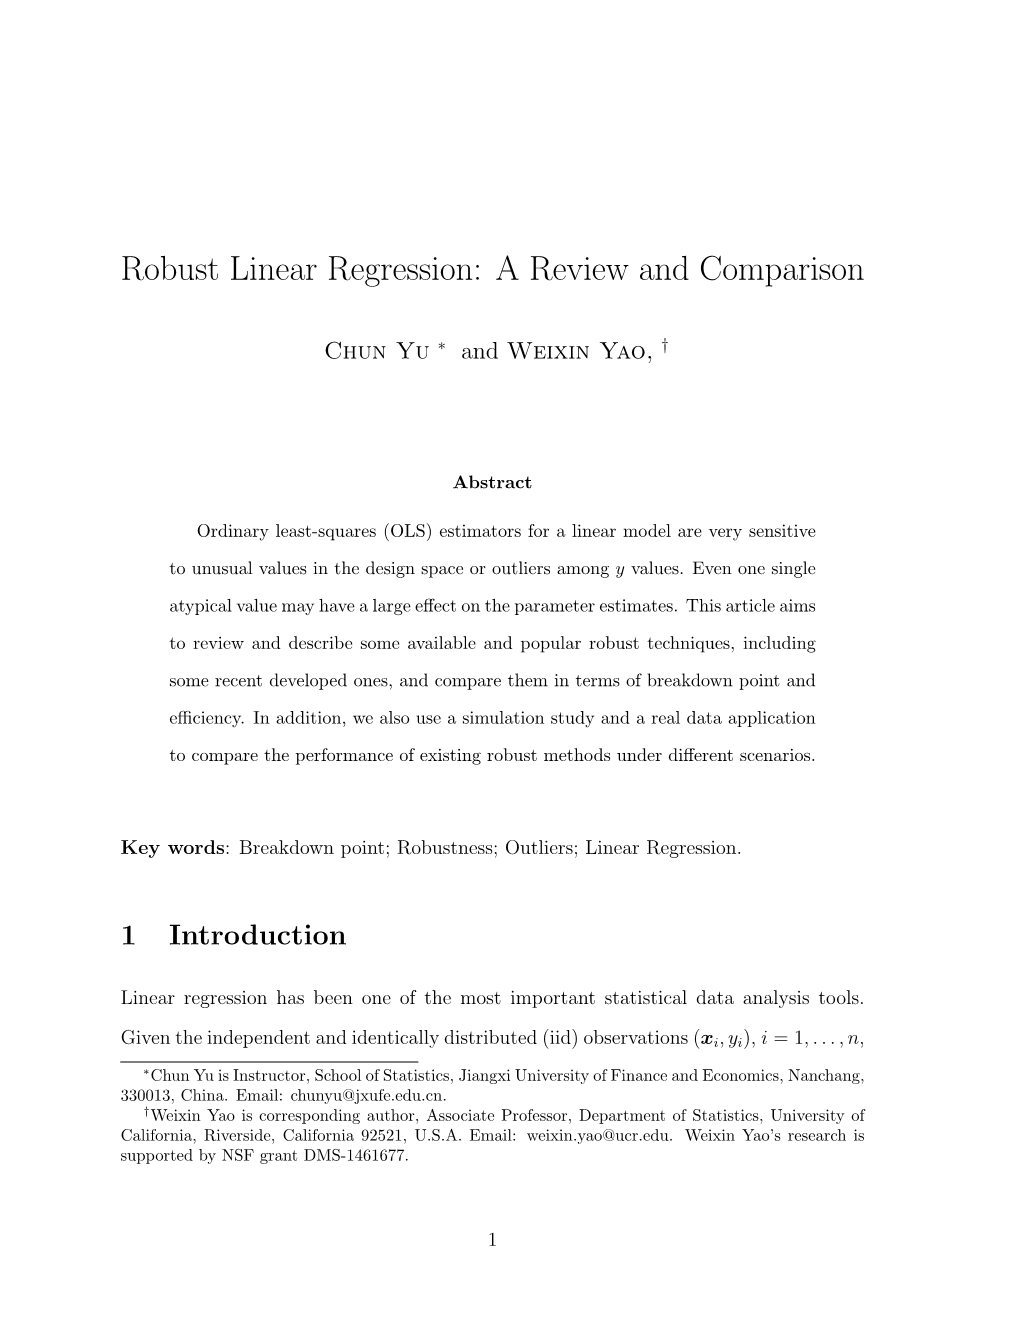 Robust Linear Regression: a Review and Comparison